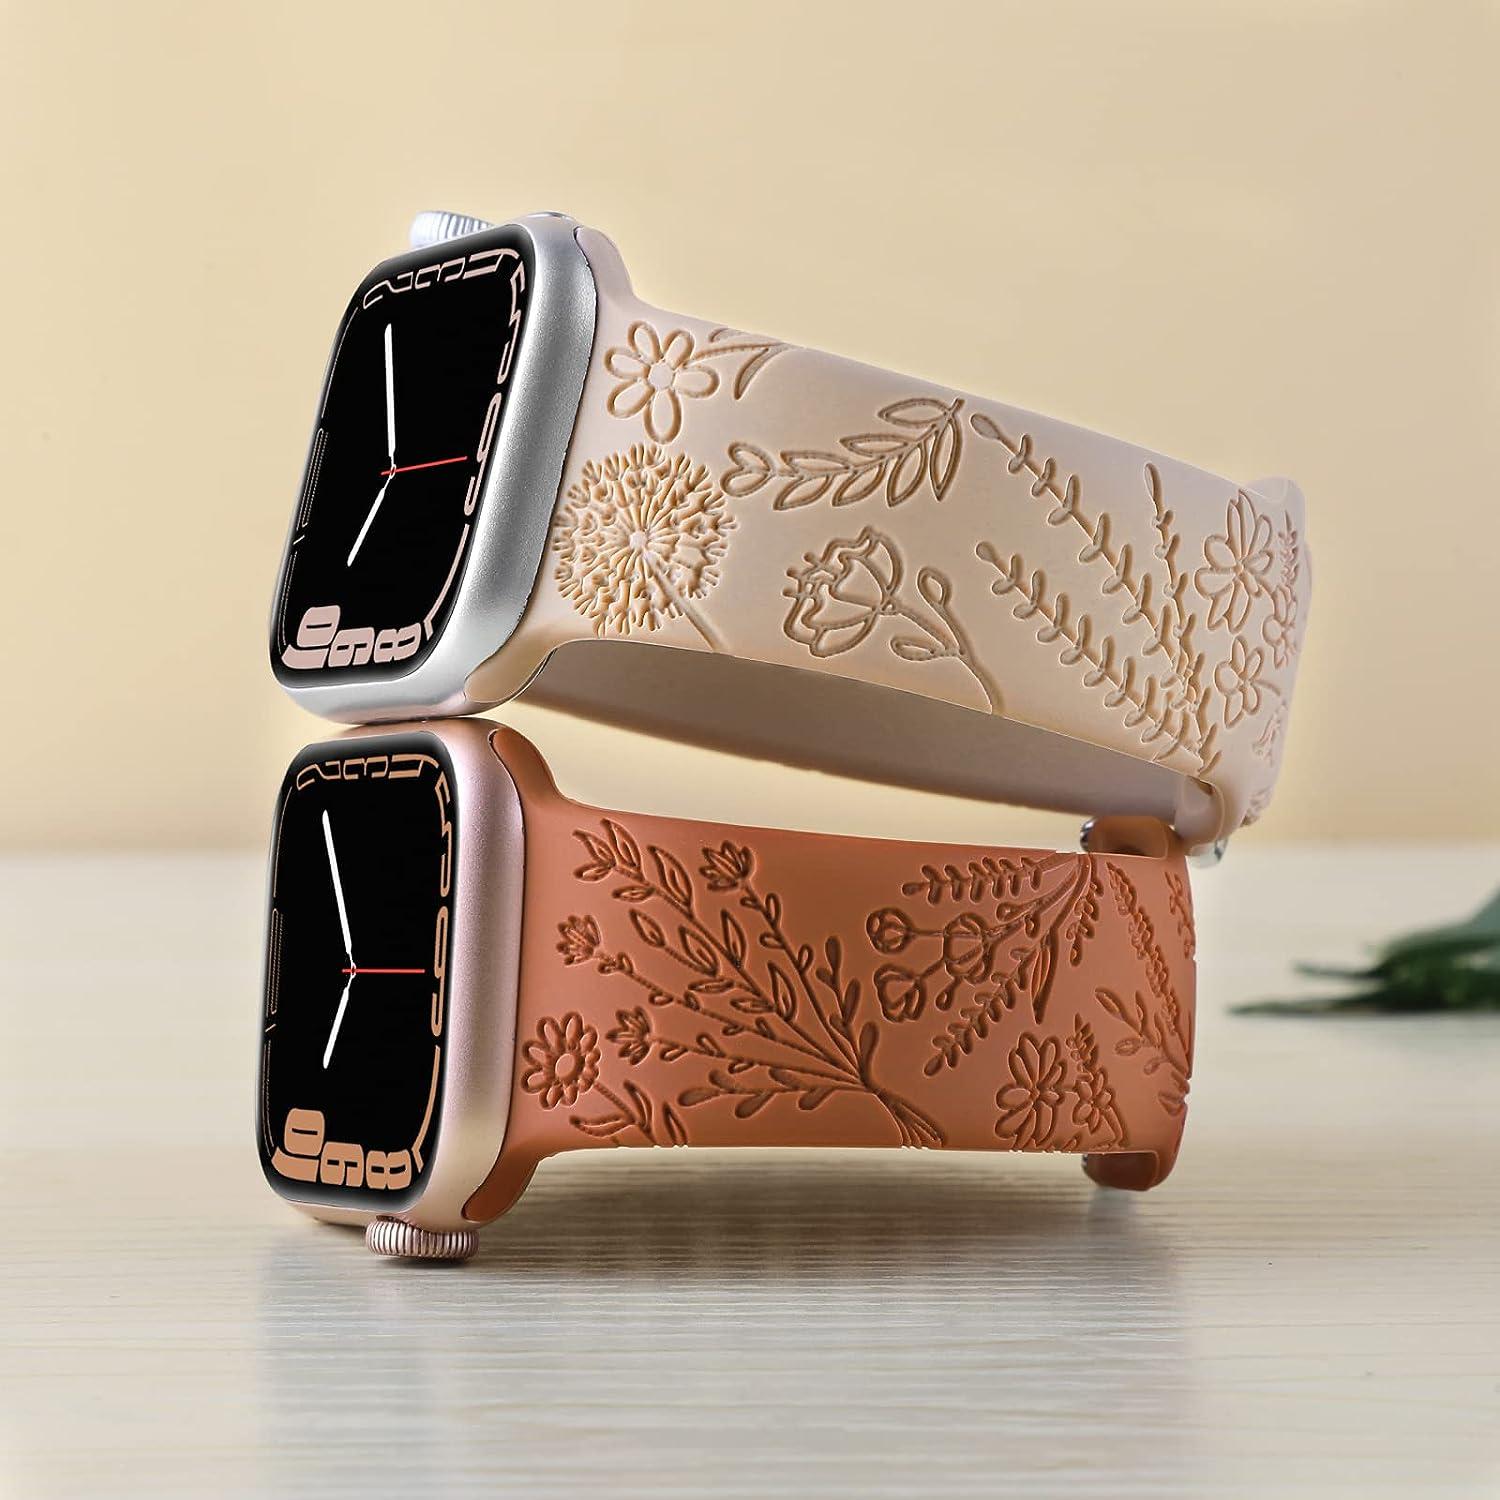 Stylish Silicone Apple Watch Band SE 40mm/38mm - Narrow Replacement Strap  for Women & Men - Fadeless Print Pattern for iWatch 6/5/4/3/2/1 - Brown